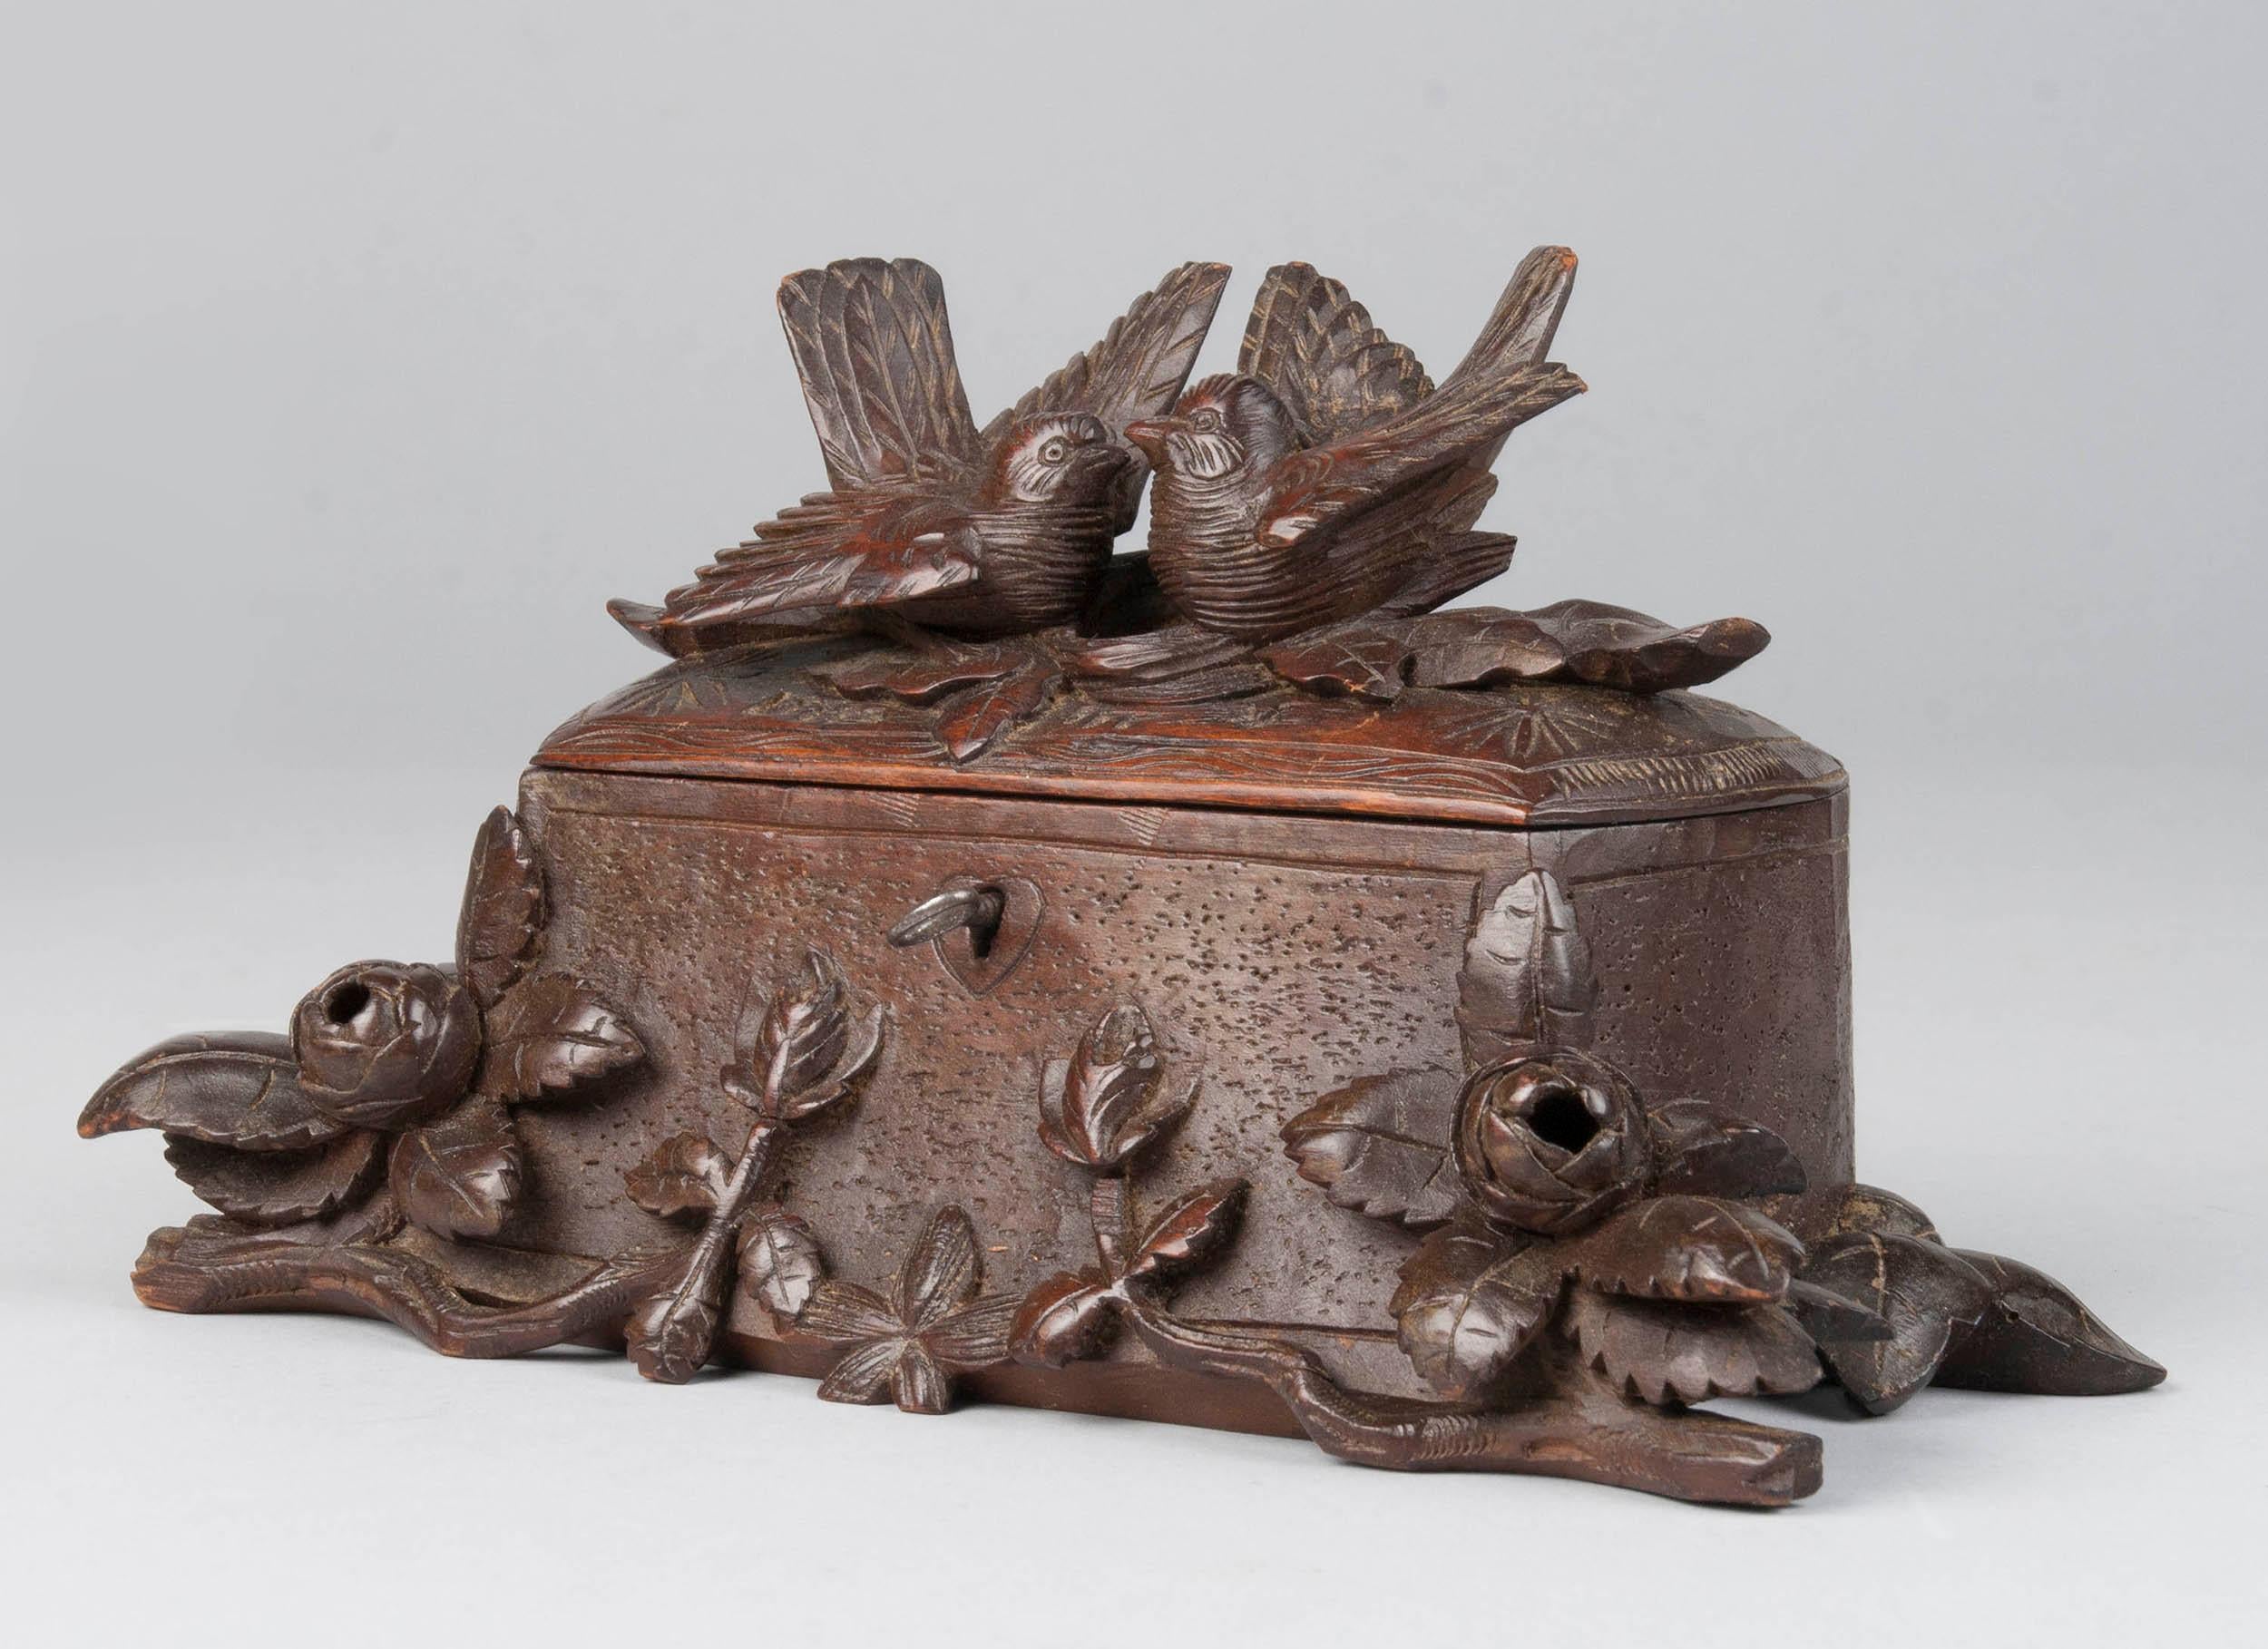 Very nice wood carved box in the typical Black Forest style. The box has refined details and beautifully detailed flowers. On the lid is a love couple of birds. Key is present, working lock. The interior is covered with blue velvet fabric.